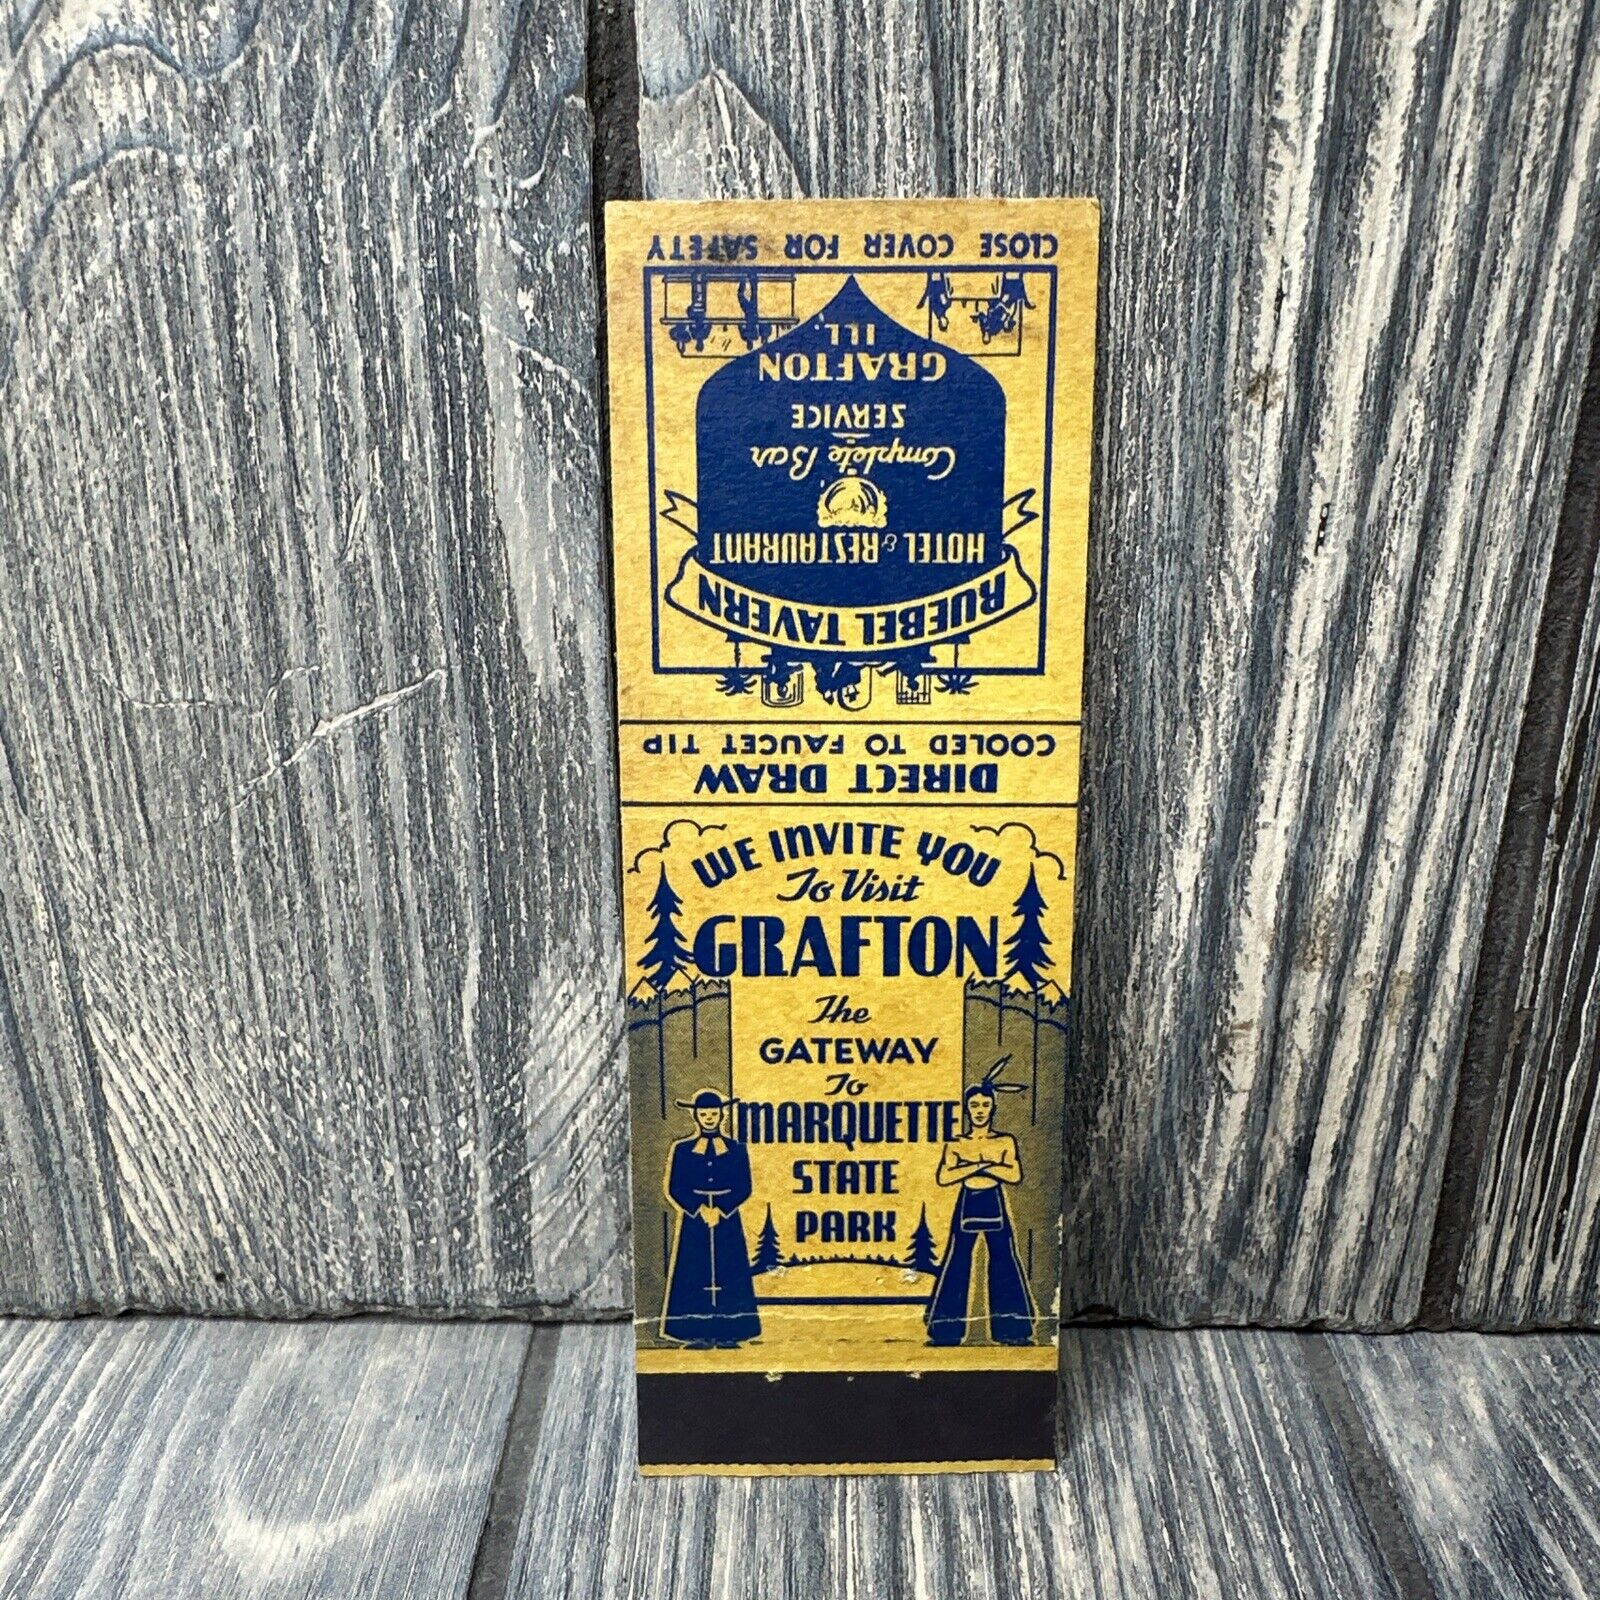 Vtg Grafton The Gateway to Marquette State Park Matchbook Cover Advertisement